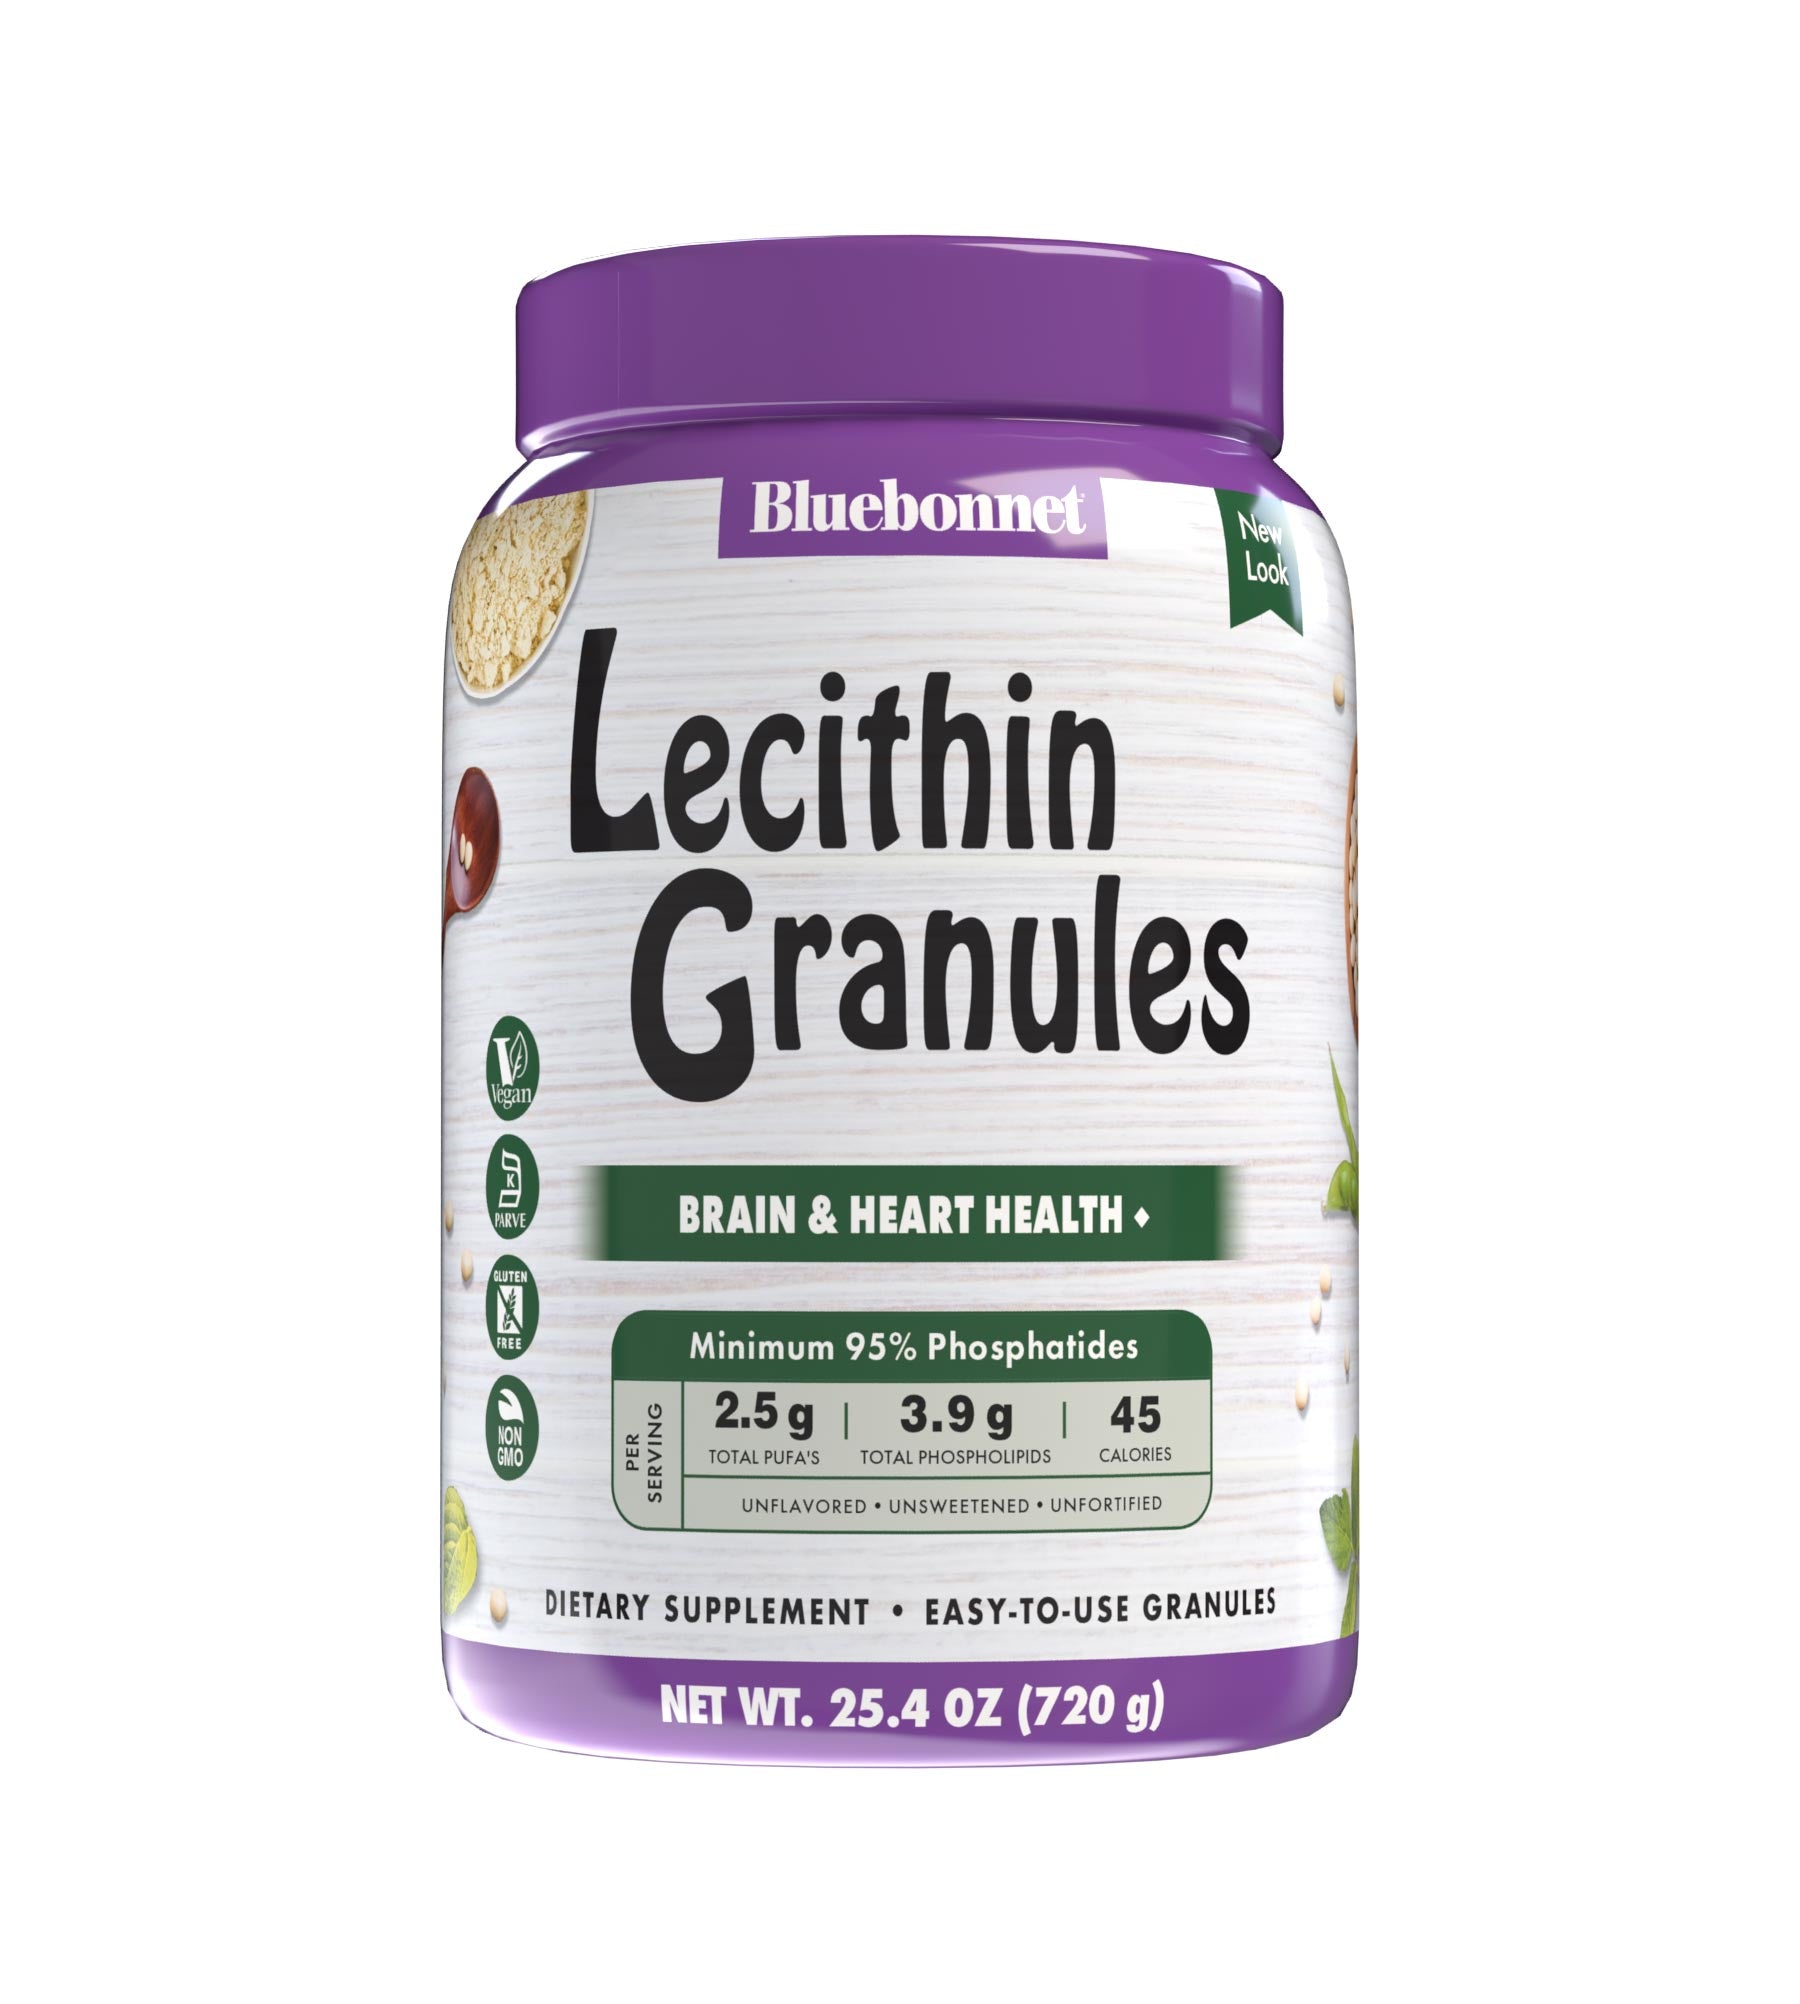 Bluebonnet’s Lecithin Granules are derived from non-GMO soybeans that were sustainably procured under an identity preserved traceability program.  #size_25.4 oz